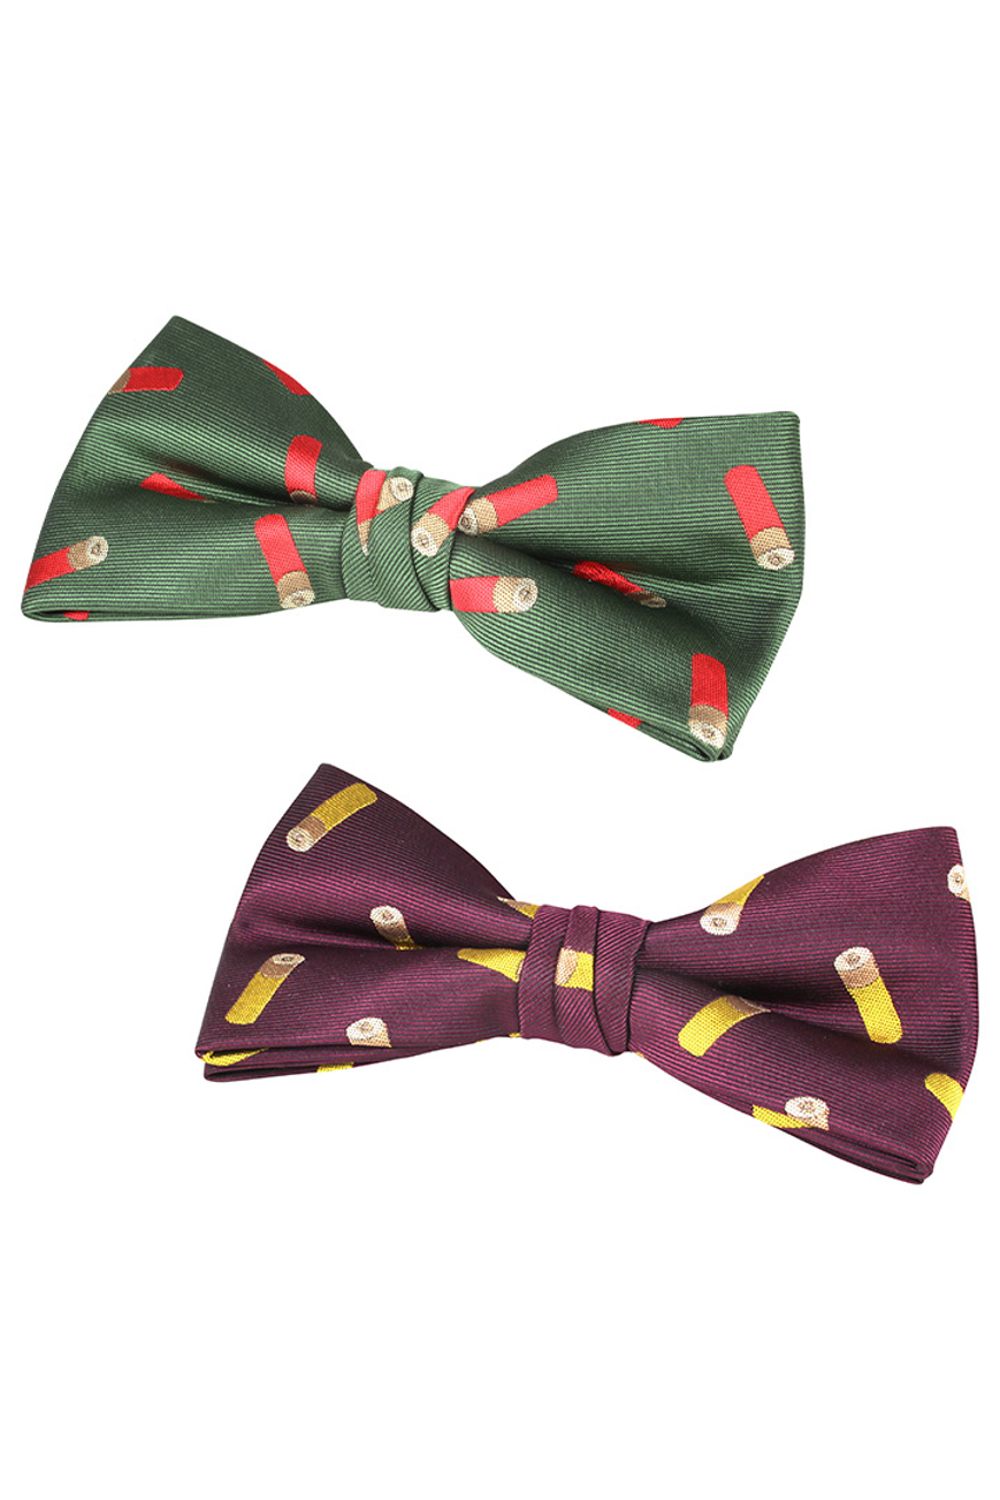 Jack Pyke Bow Tie In Cartridge Green and Wine